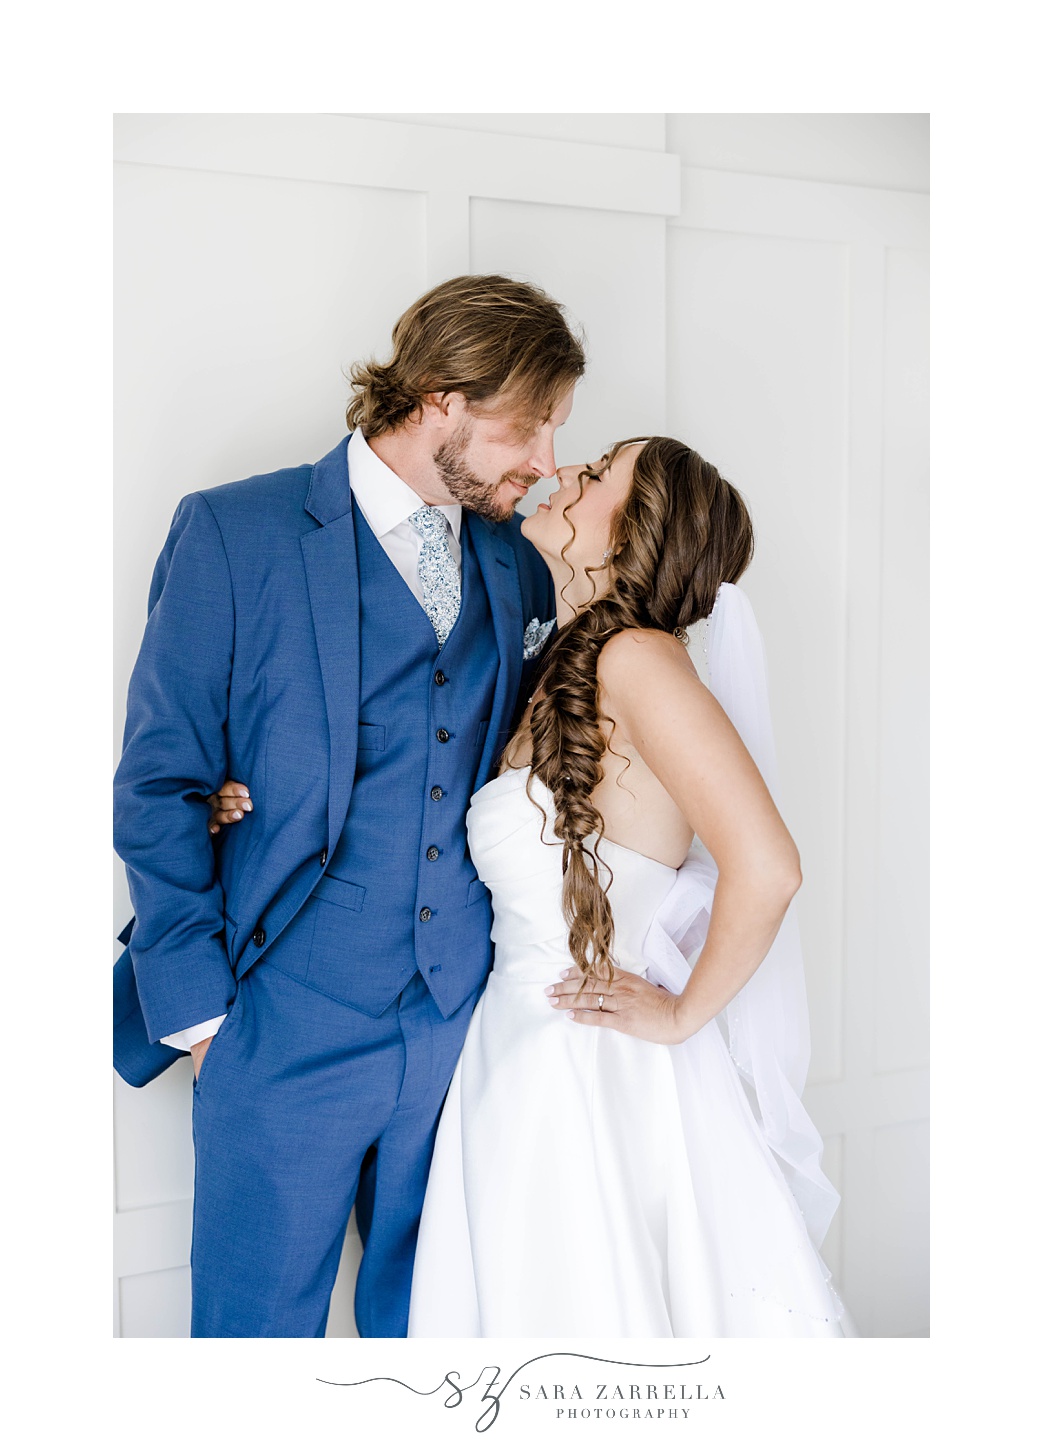 newlyweds kiss by white walls in Regatta Place